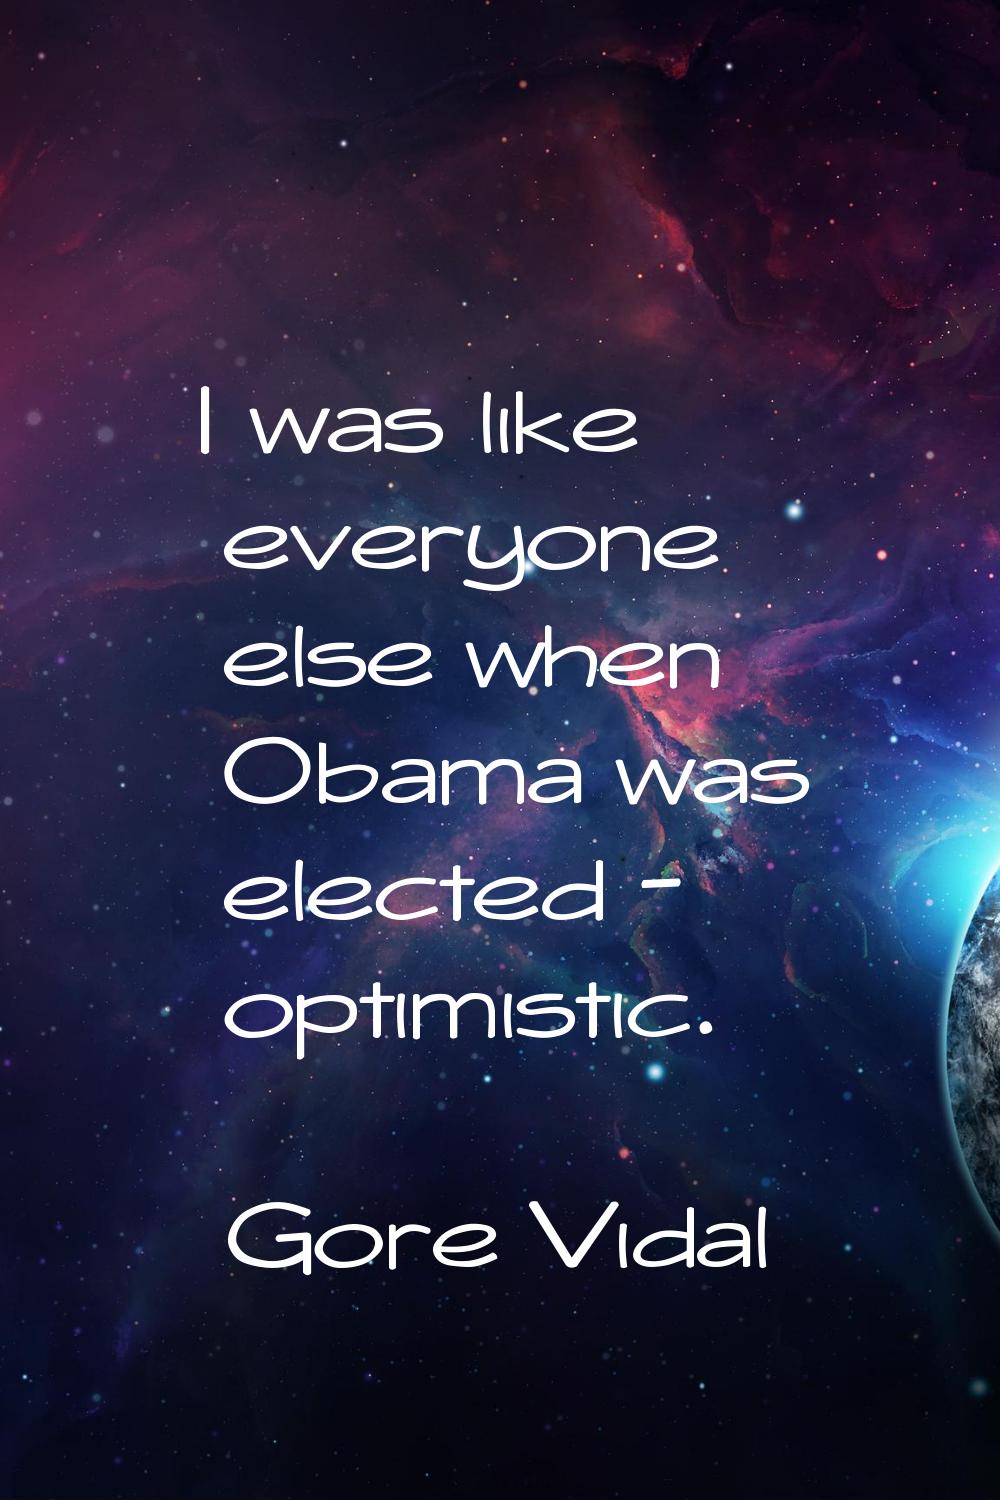 I was like everyone else when Obama was elected - optimistic.